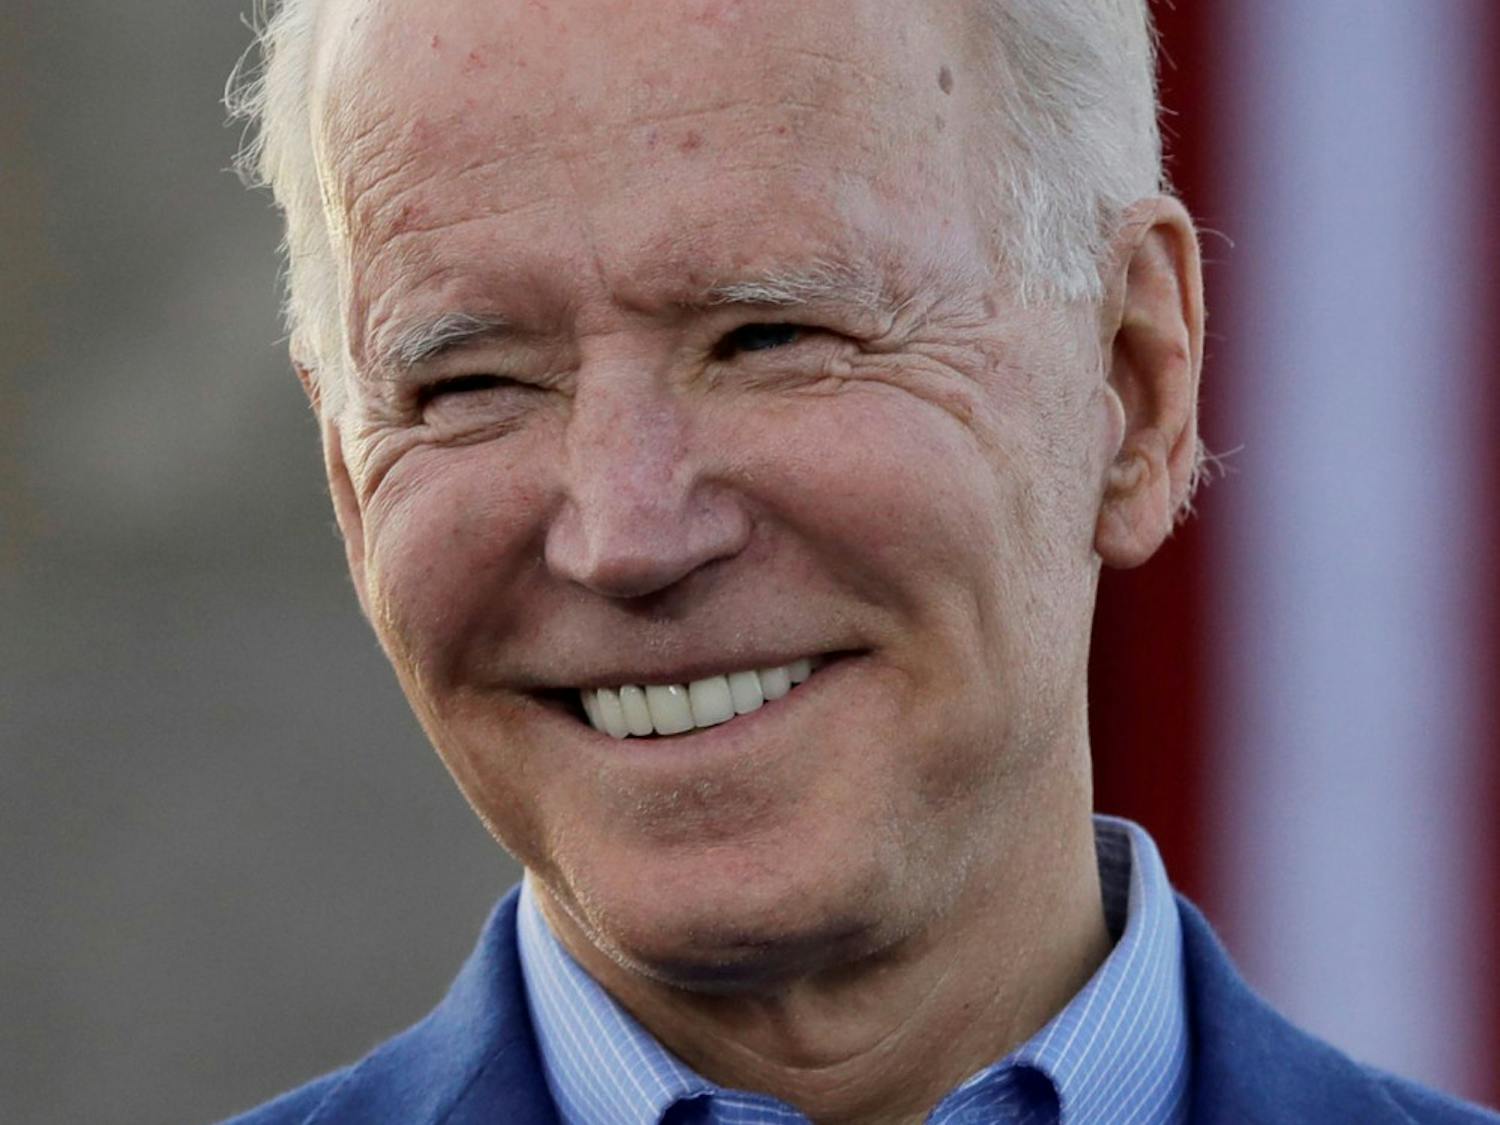 Democratic presidential candidate, former Vice President Joe Biden knowledges the crowd during a campaign rally Saturday, March 7, 2020, in Kansas City, Mo. (AP Photo/Charlie Riedel)